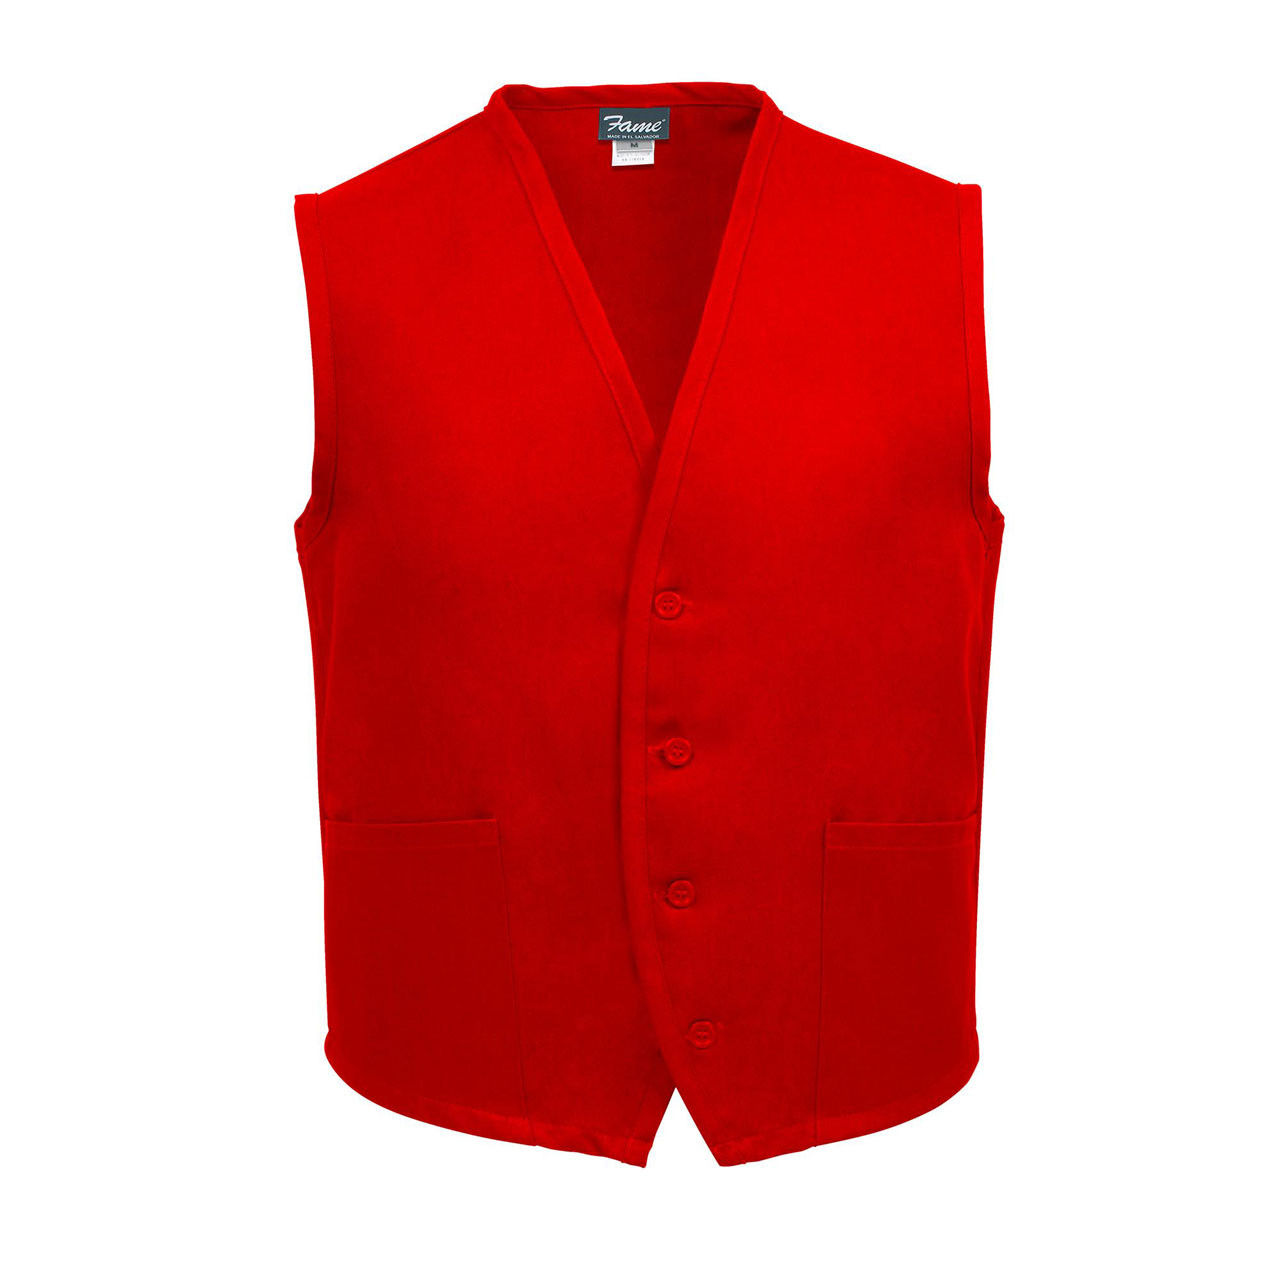 What material is used for the red vest?